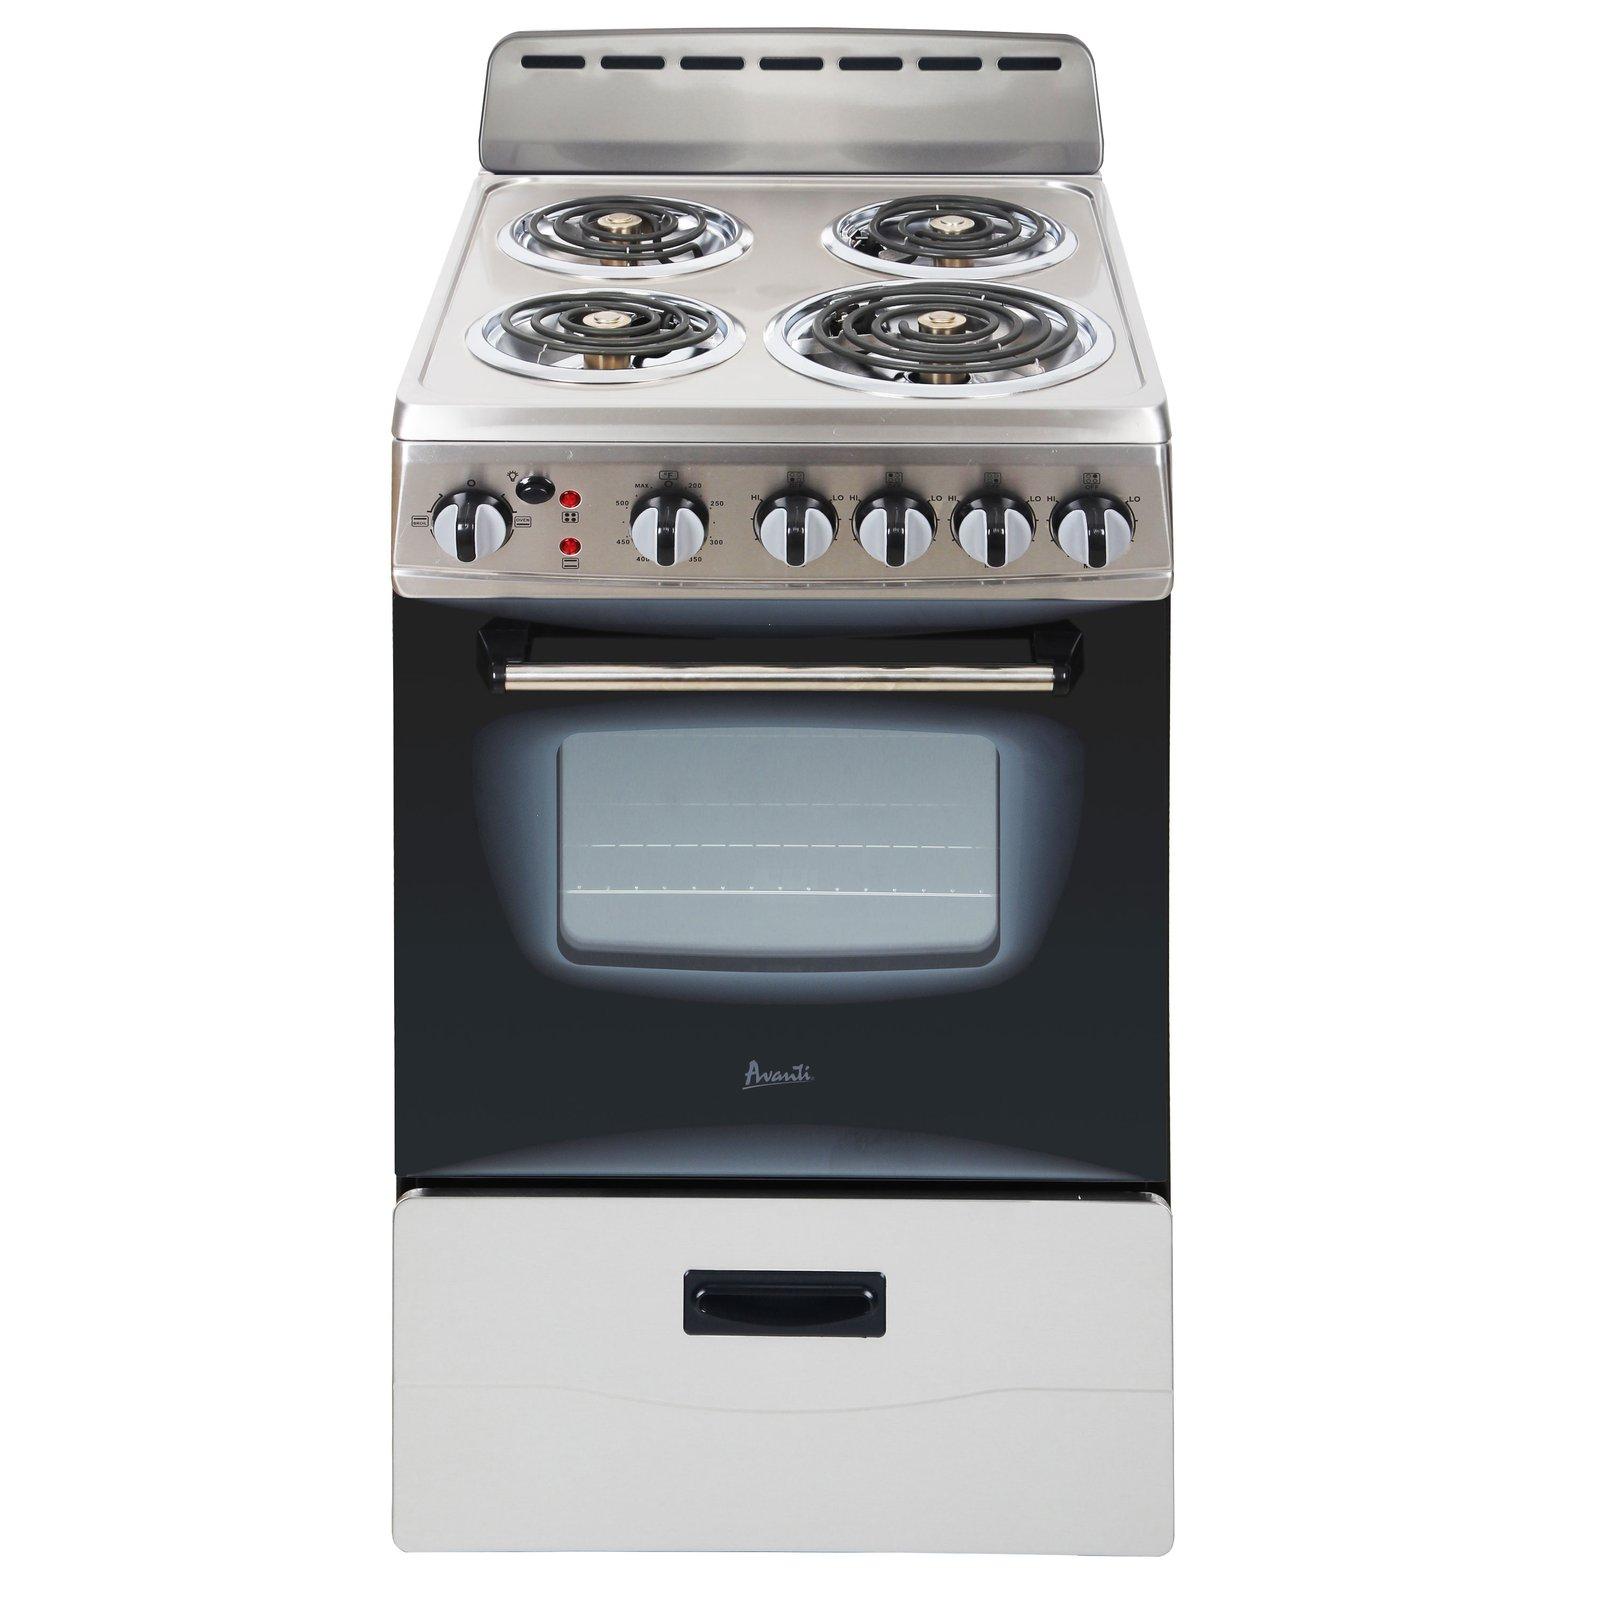 Avanti 20" Electric Range Oven with Framed Glass Door - Stainless Steel / 2.1 cu. ft.